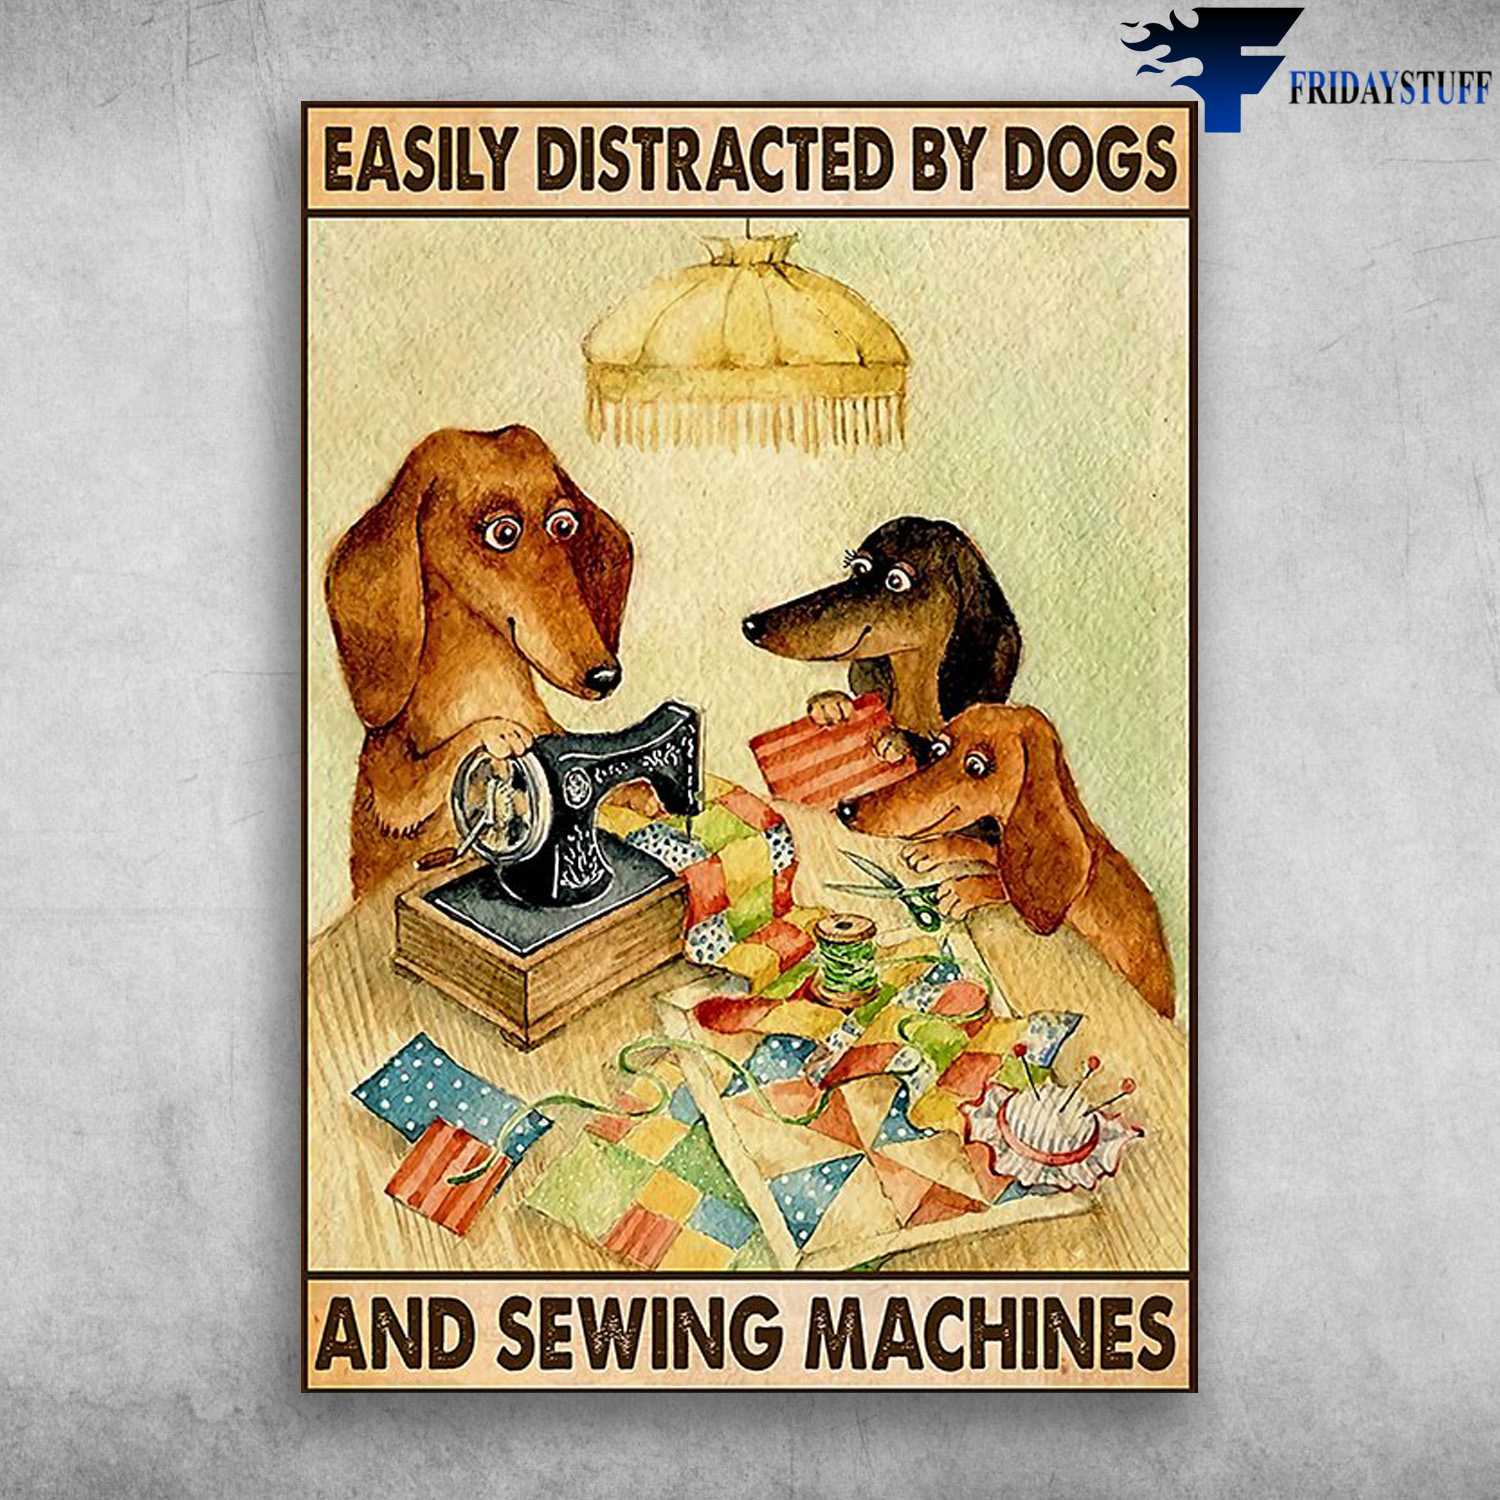 Sewing Dachshund Dog - Easily Distracted By Dogs, And Sewing Machines